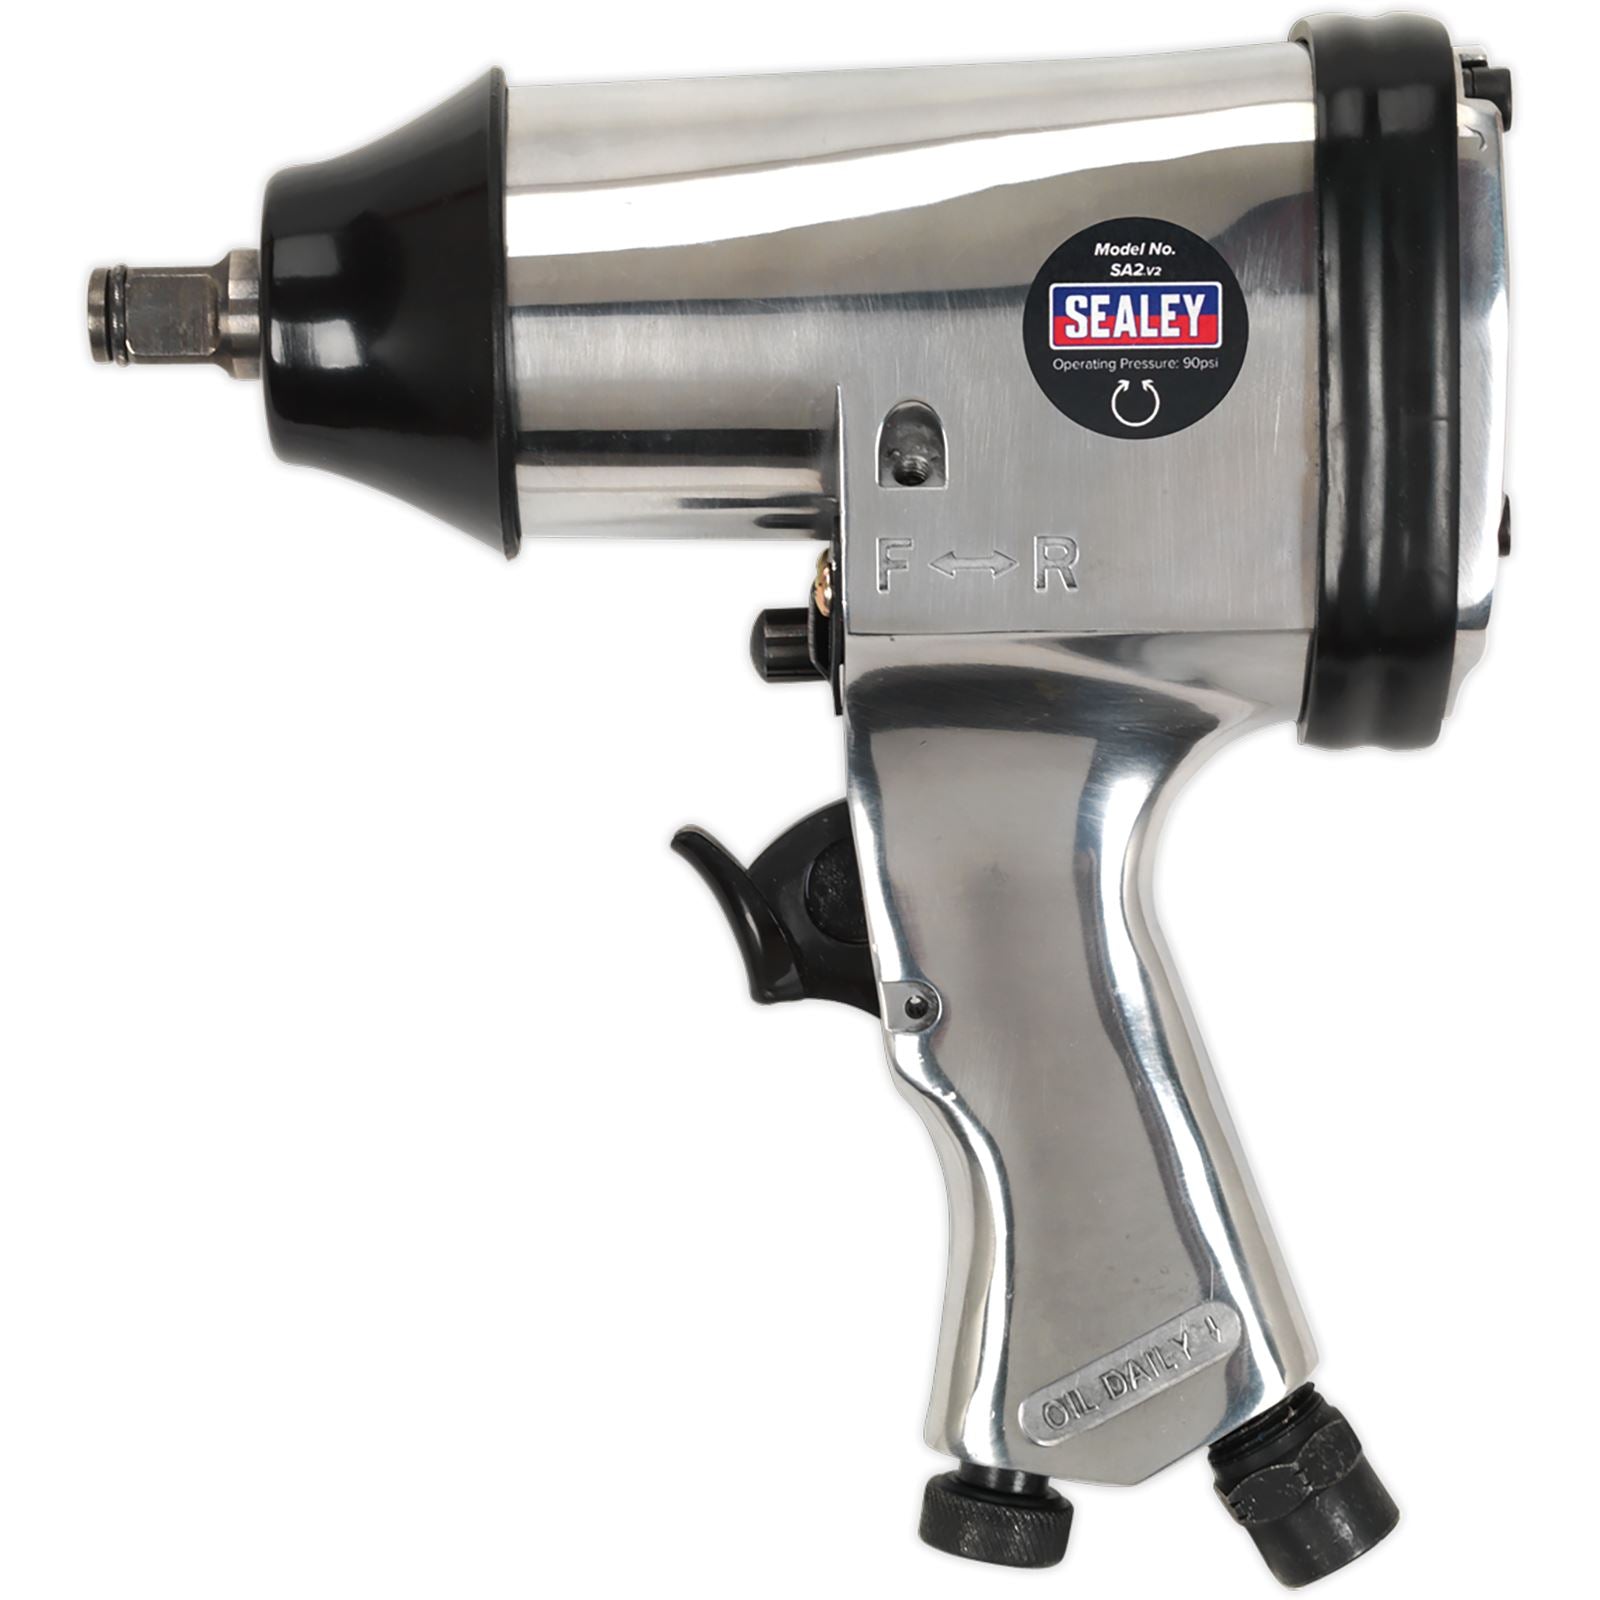 Sealey 1/2" Square Drive Air Impact Wrench